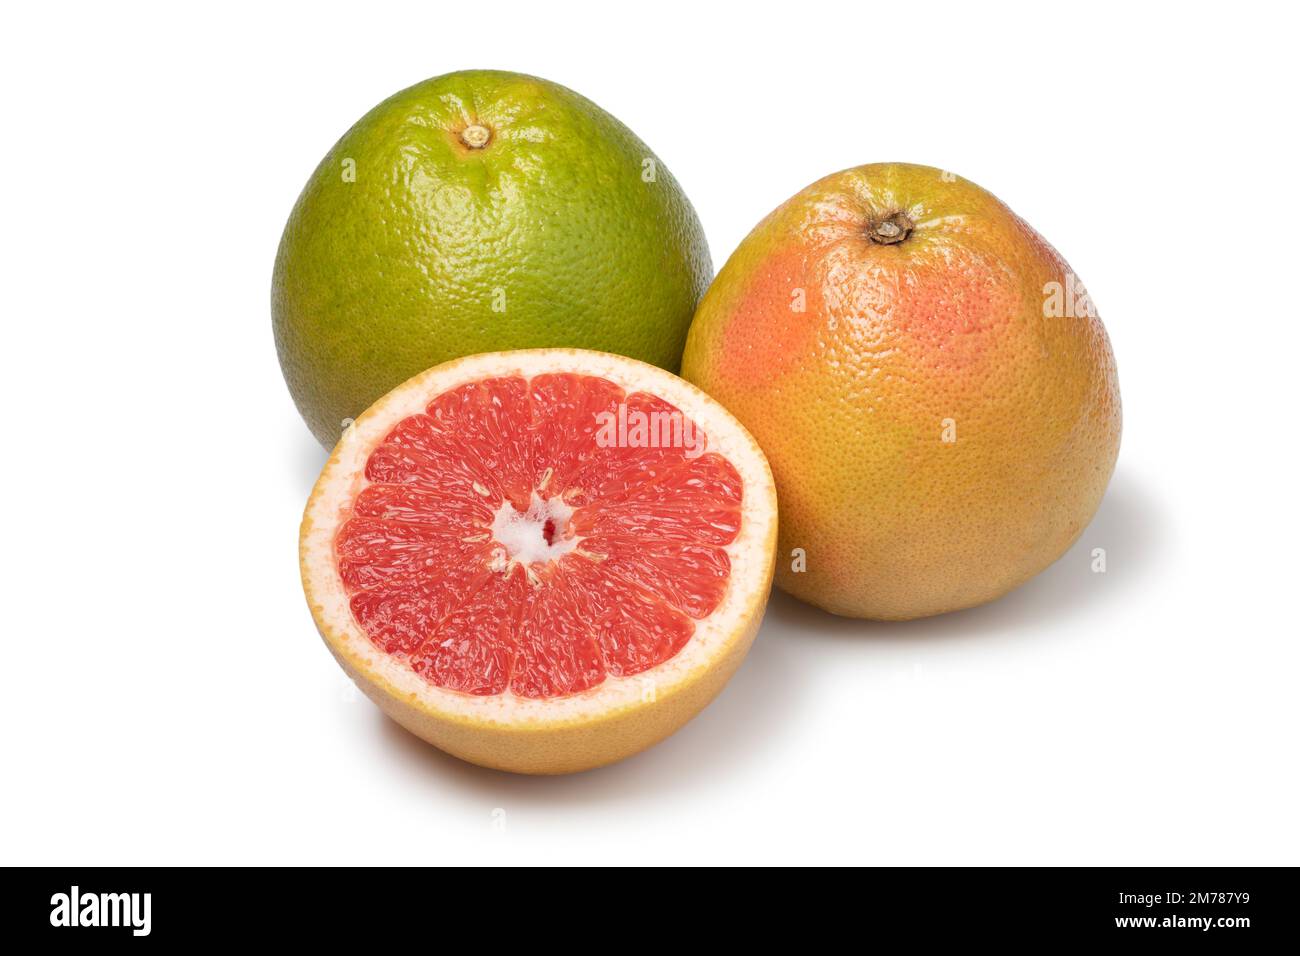 Whole and halved red juicy grapefruit close up isolated on white background Stock Photo